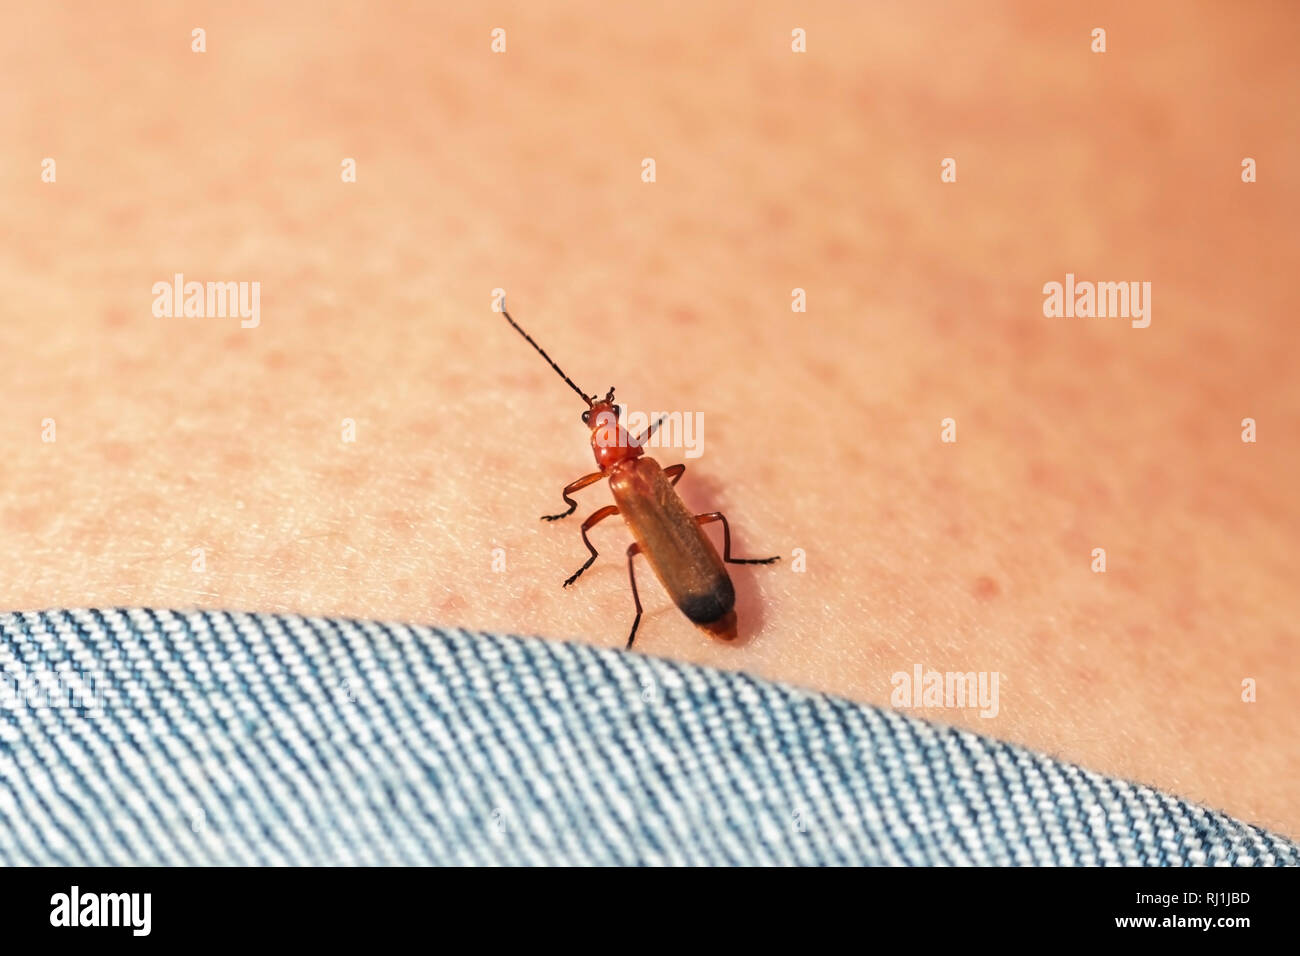 Common Red Soldier Beetle crawling over a persons leg Stock Photo